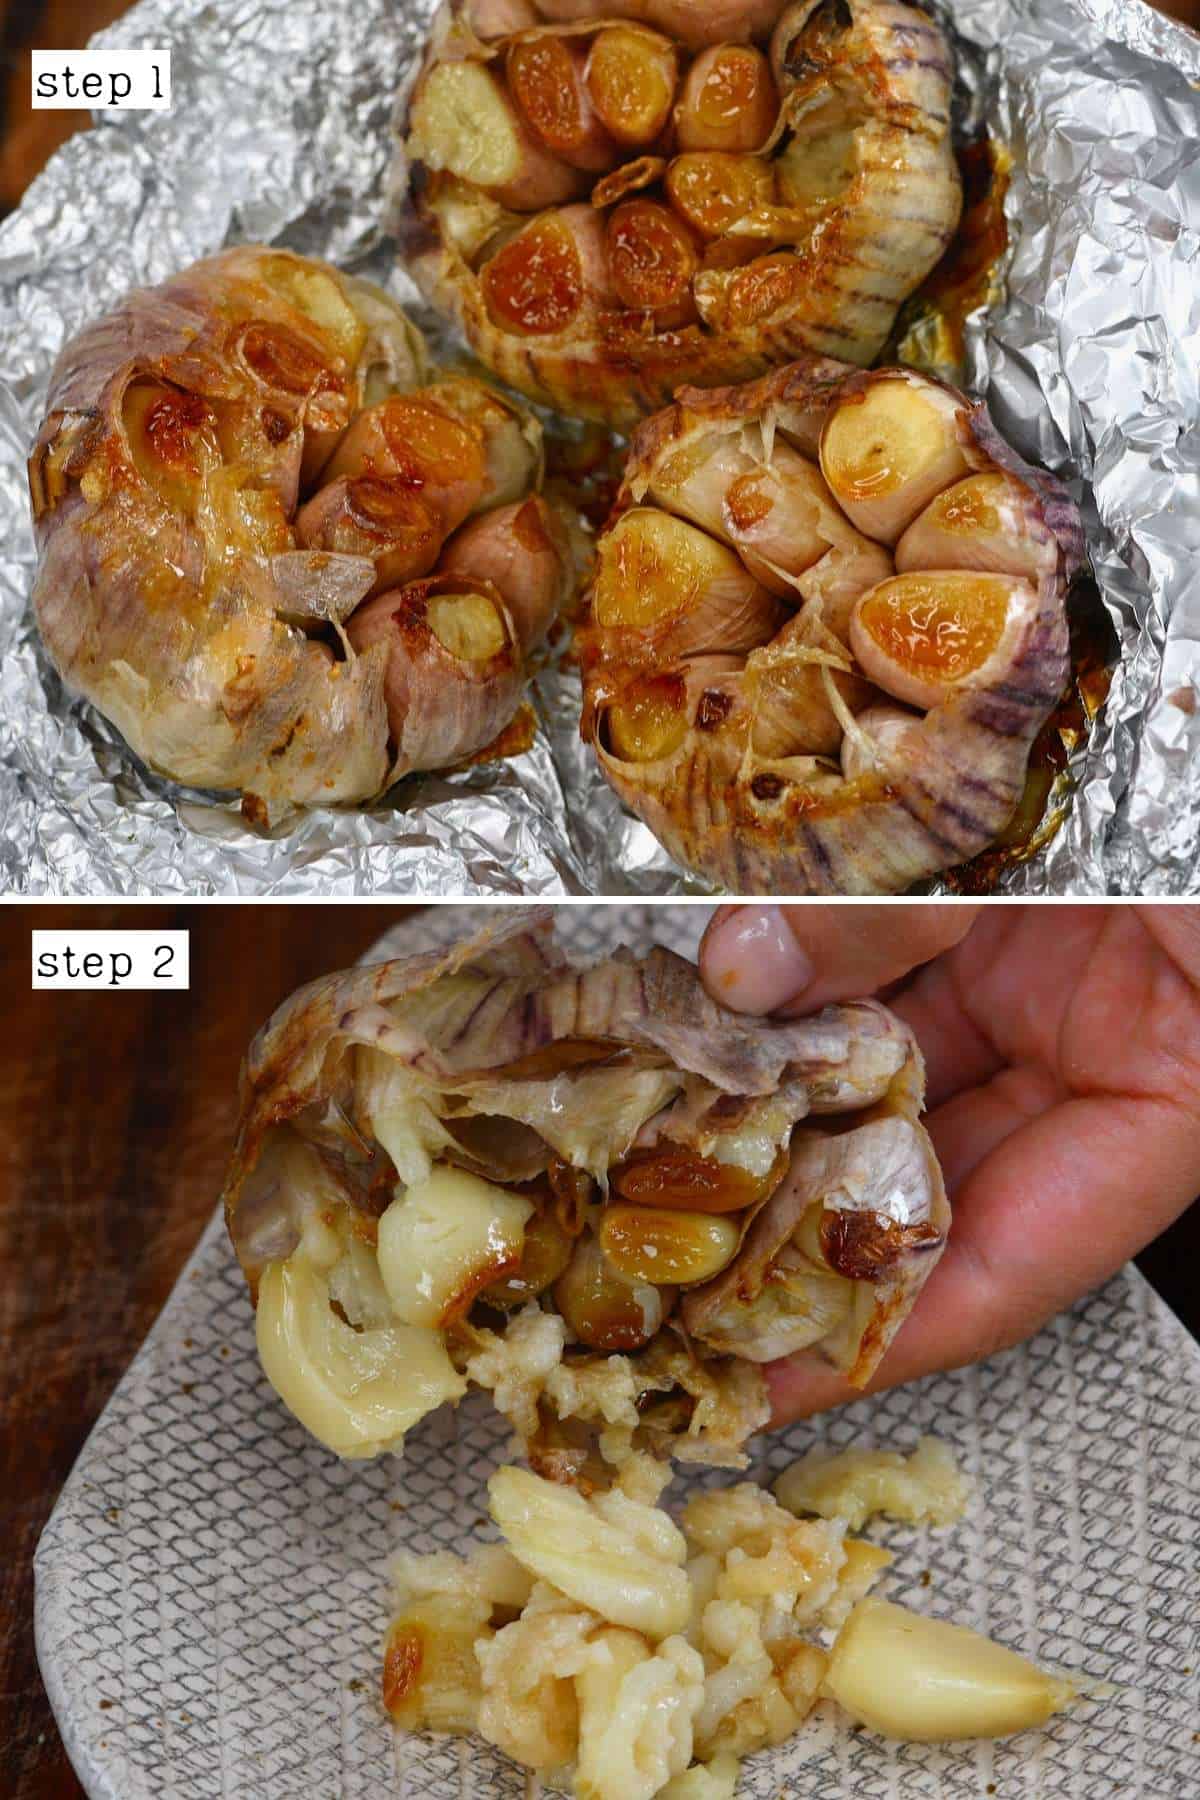 https://www.alphafoodie.com/wp-content/uploads/2021/08/how-to-roast-garlic-Taking-out-roasted-garlic-cloves.jpg